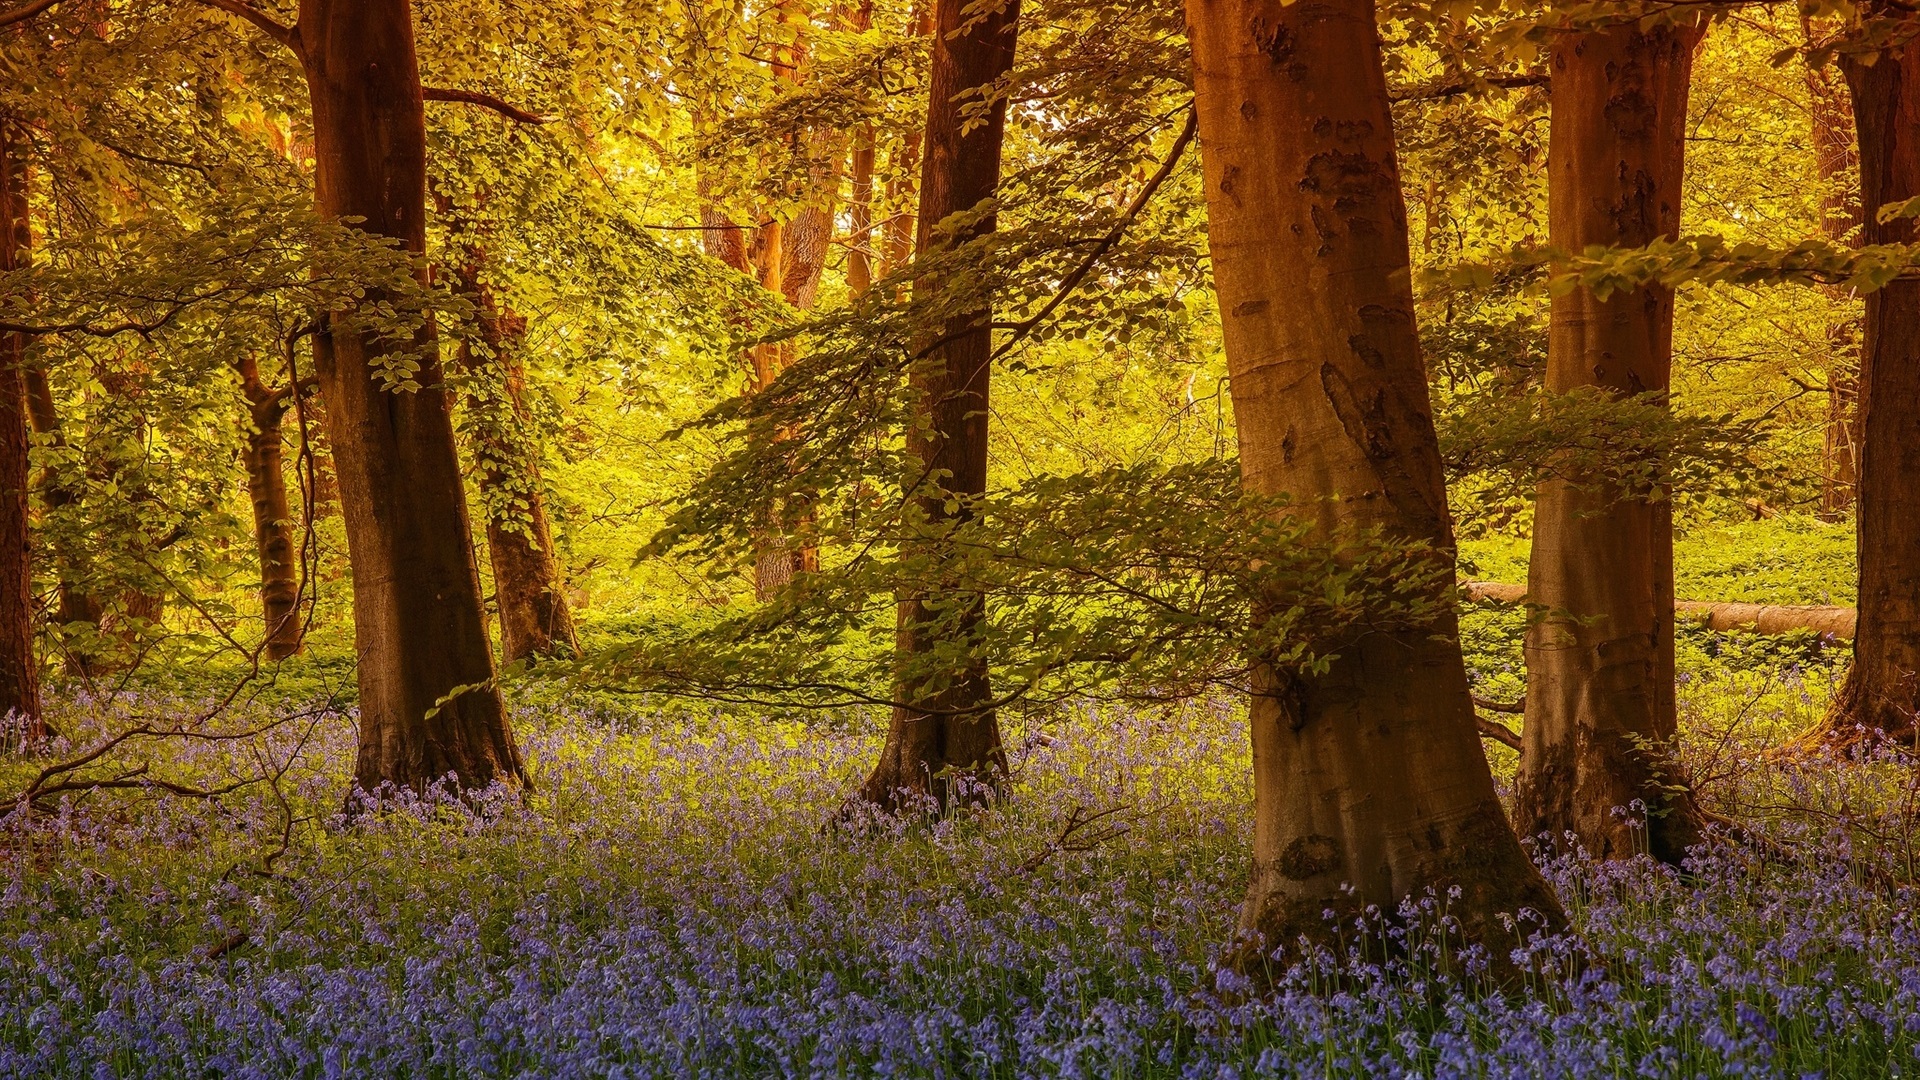 General 1920x1080 England North Yorkshire trees flowers nature